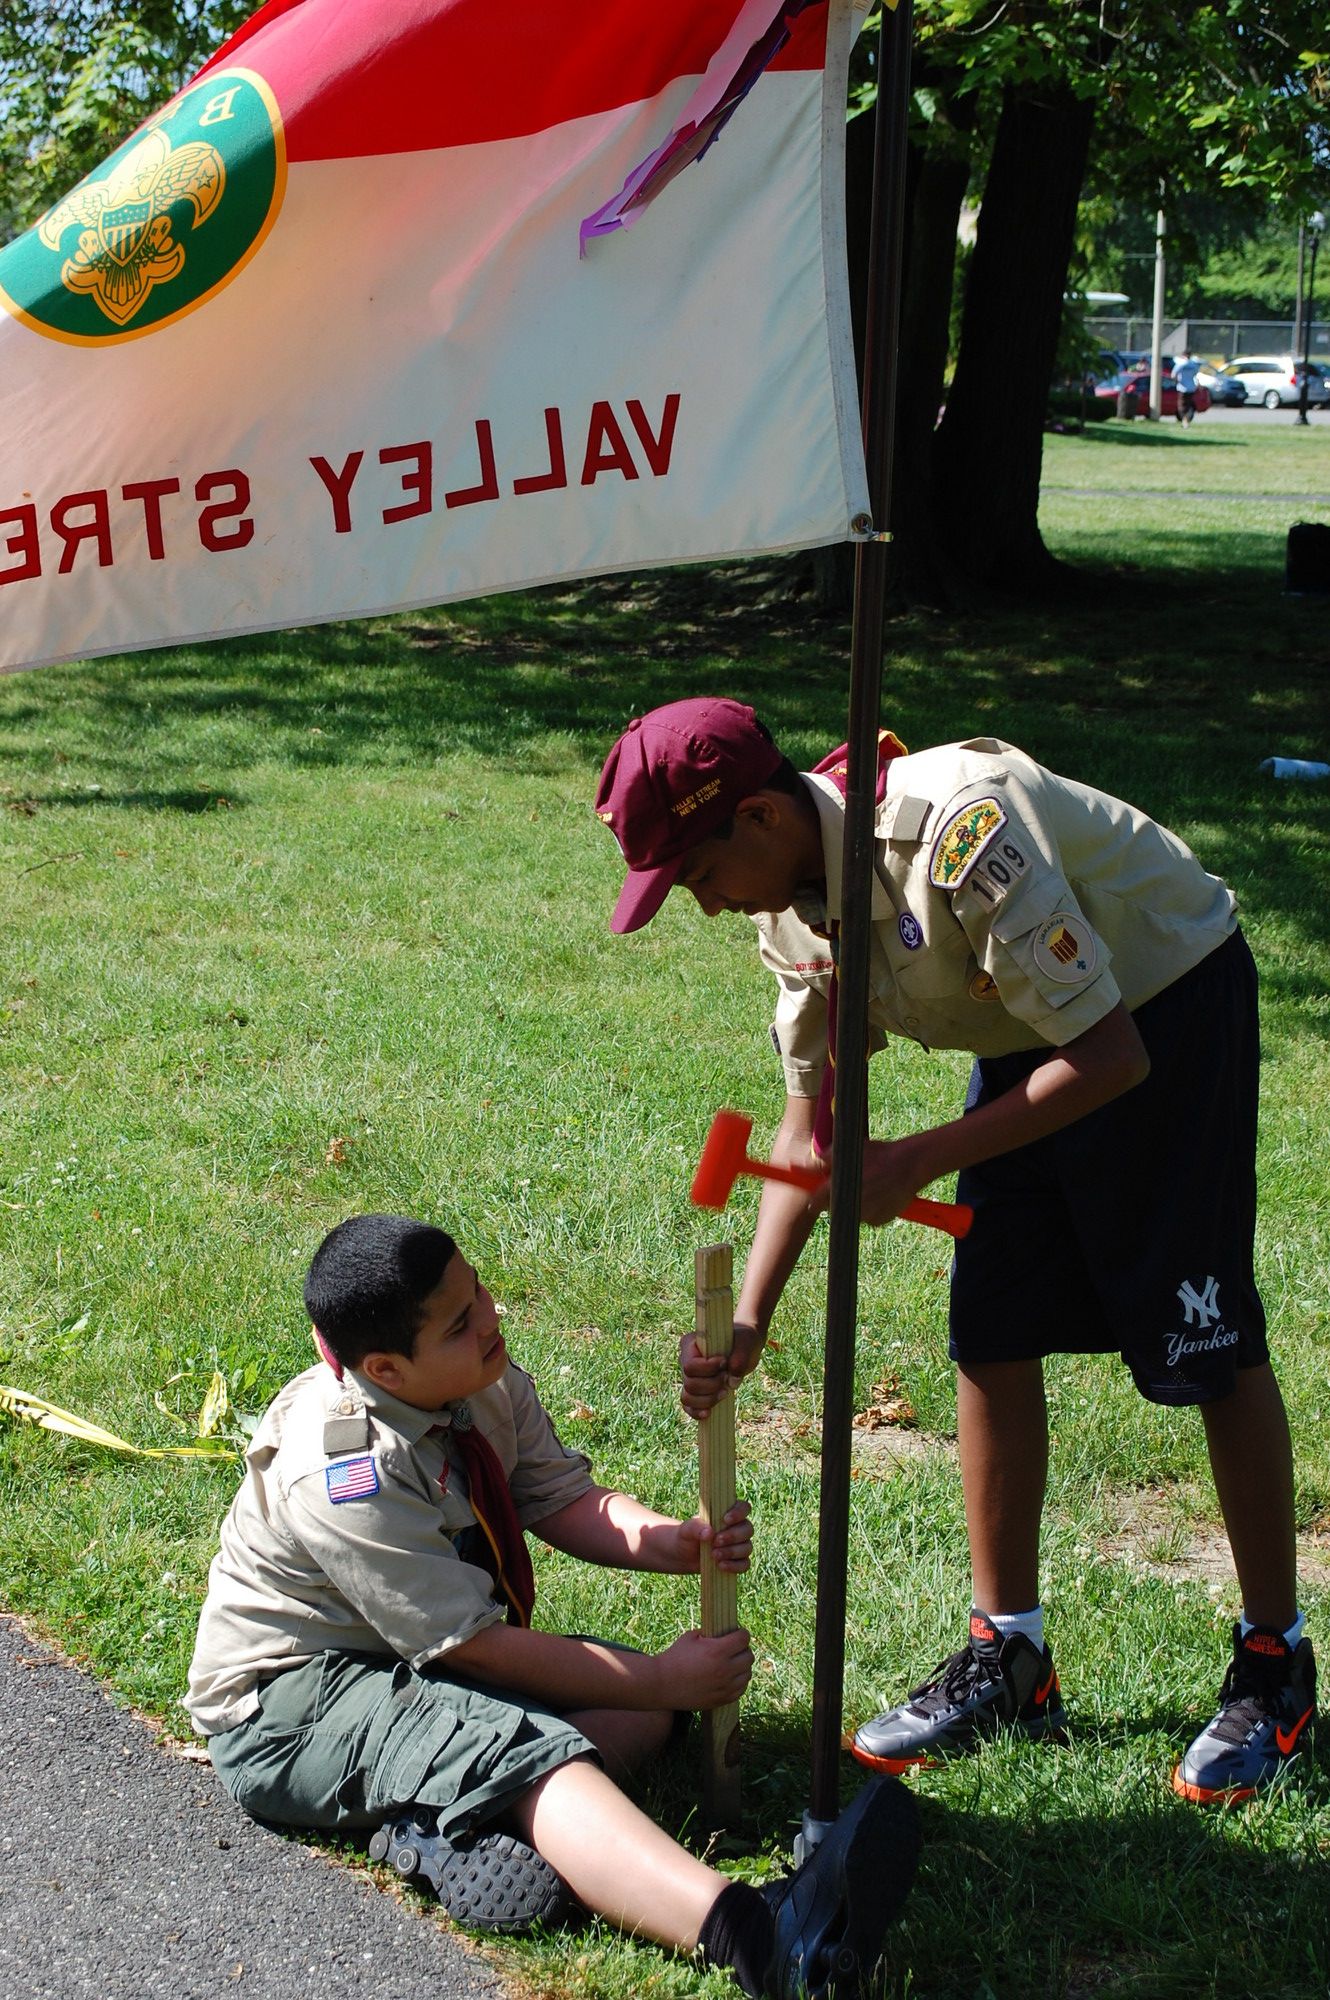 Justin Berrios and Julian Tineo helped set up the entrance to Boy Scout Troop 109's campsite.